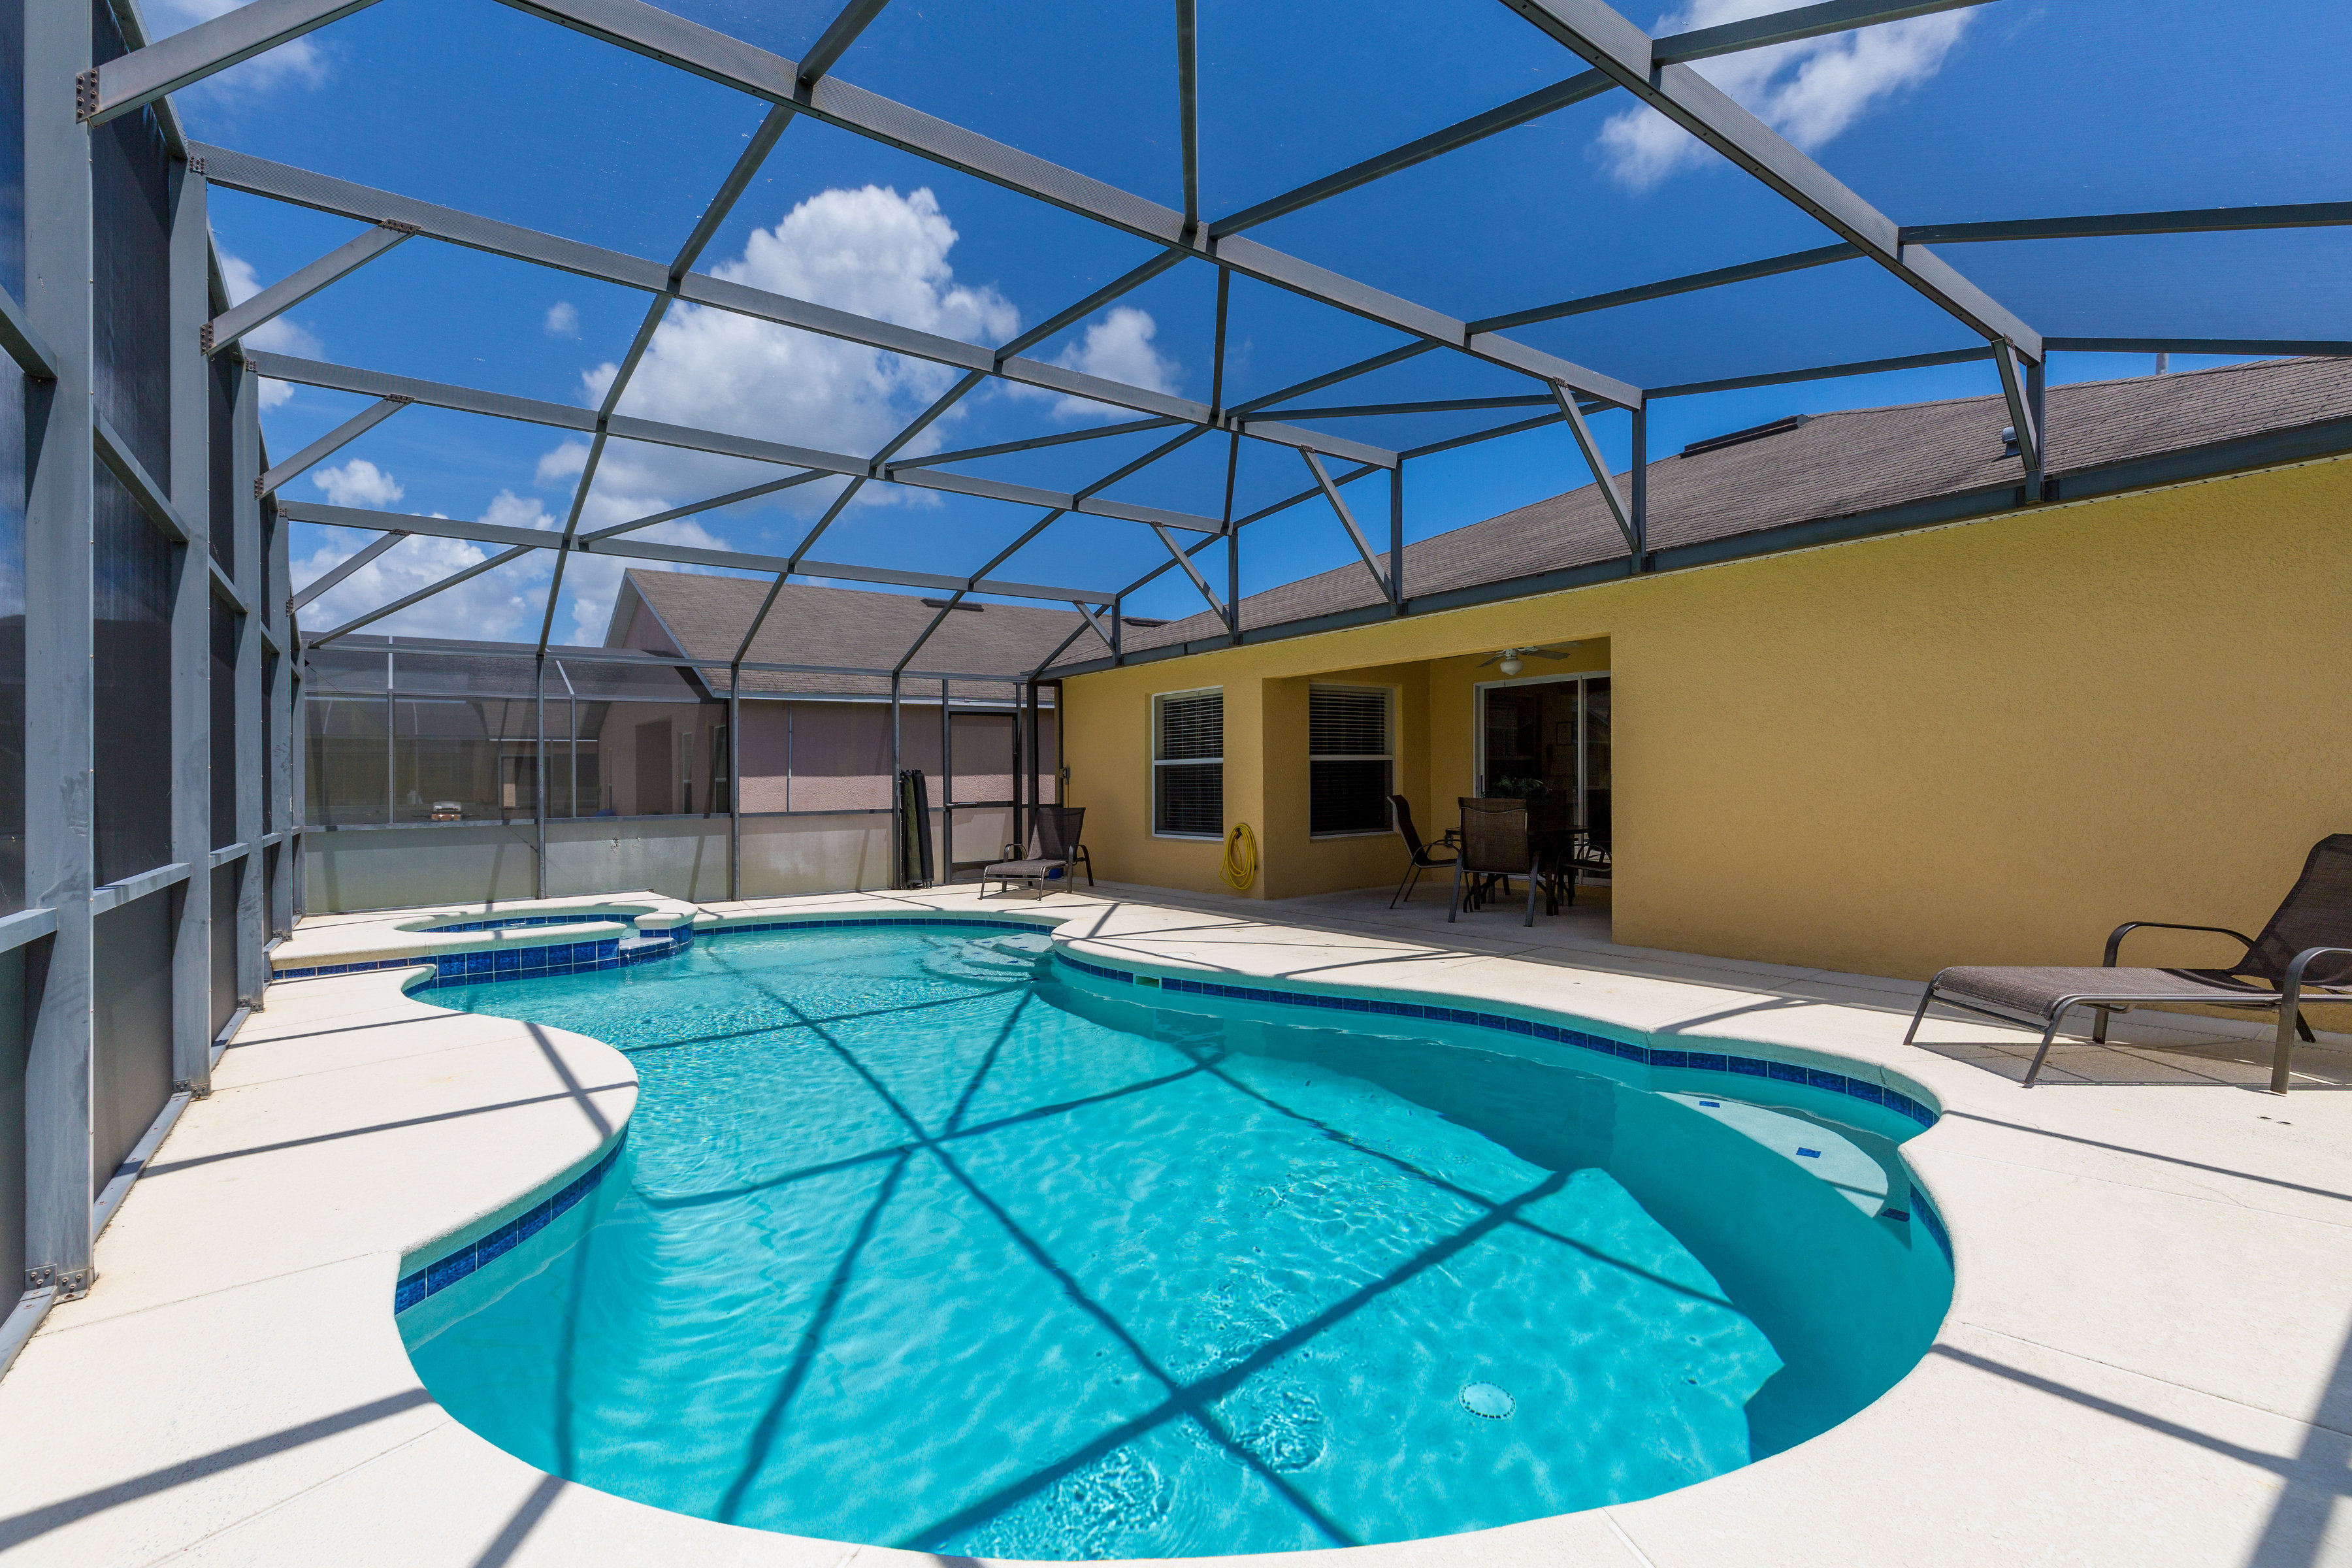 reserve at town center vacation rentals vacation rentals united states florida davenport vacation rentals united states florida davenport